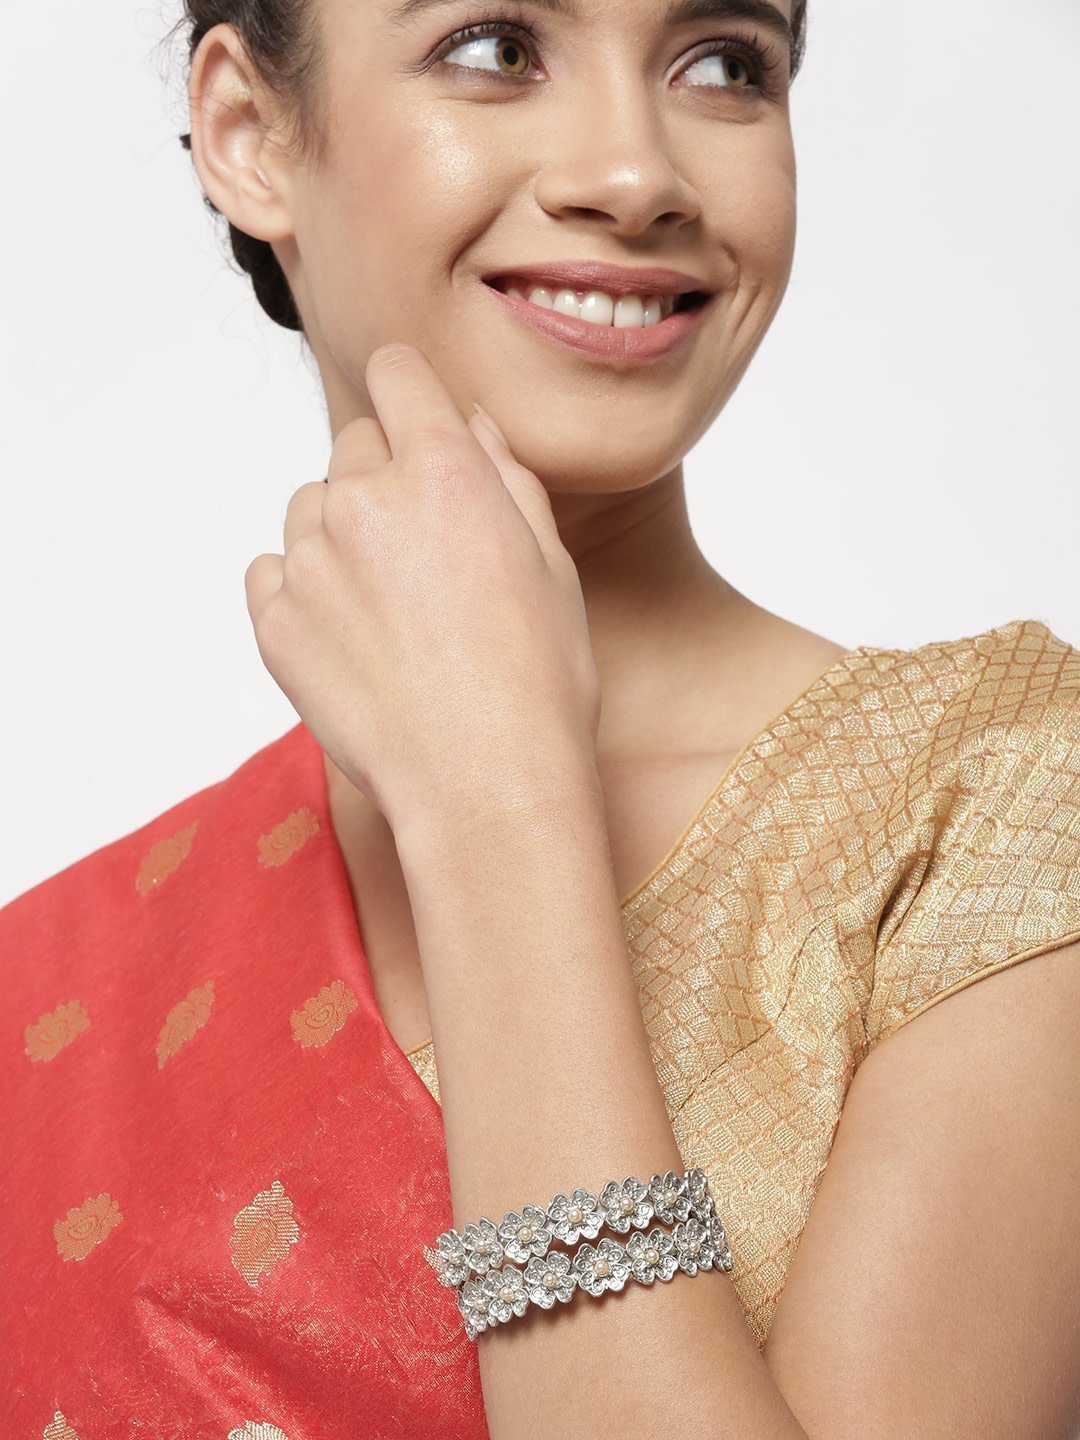 Women's Set Of 2 Silver-Plated Pearls Studded Bangles in Floral Pattern - Priyaasi